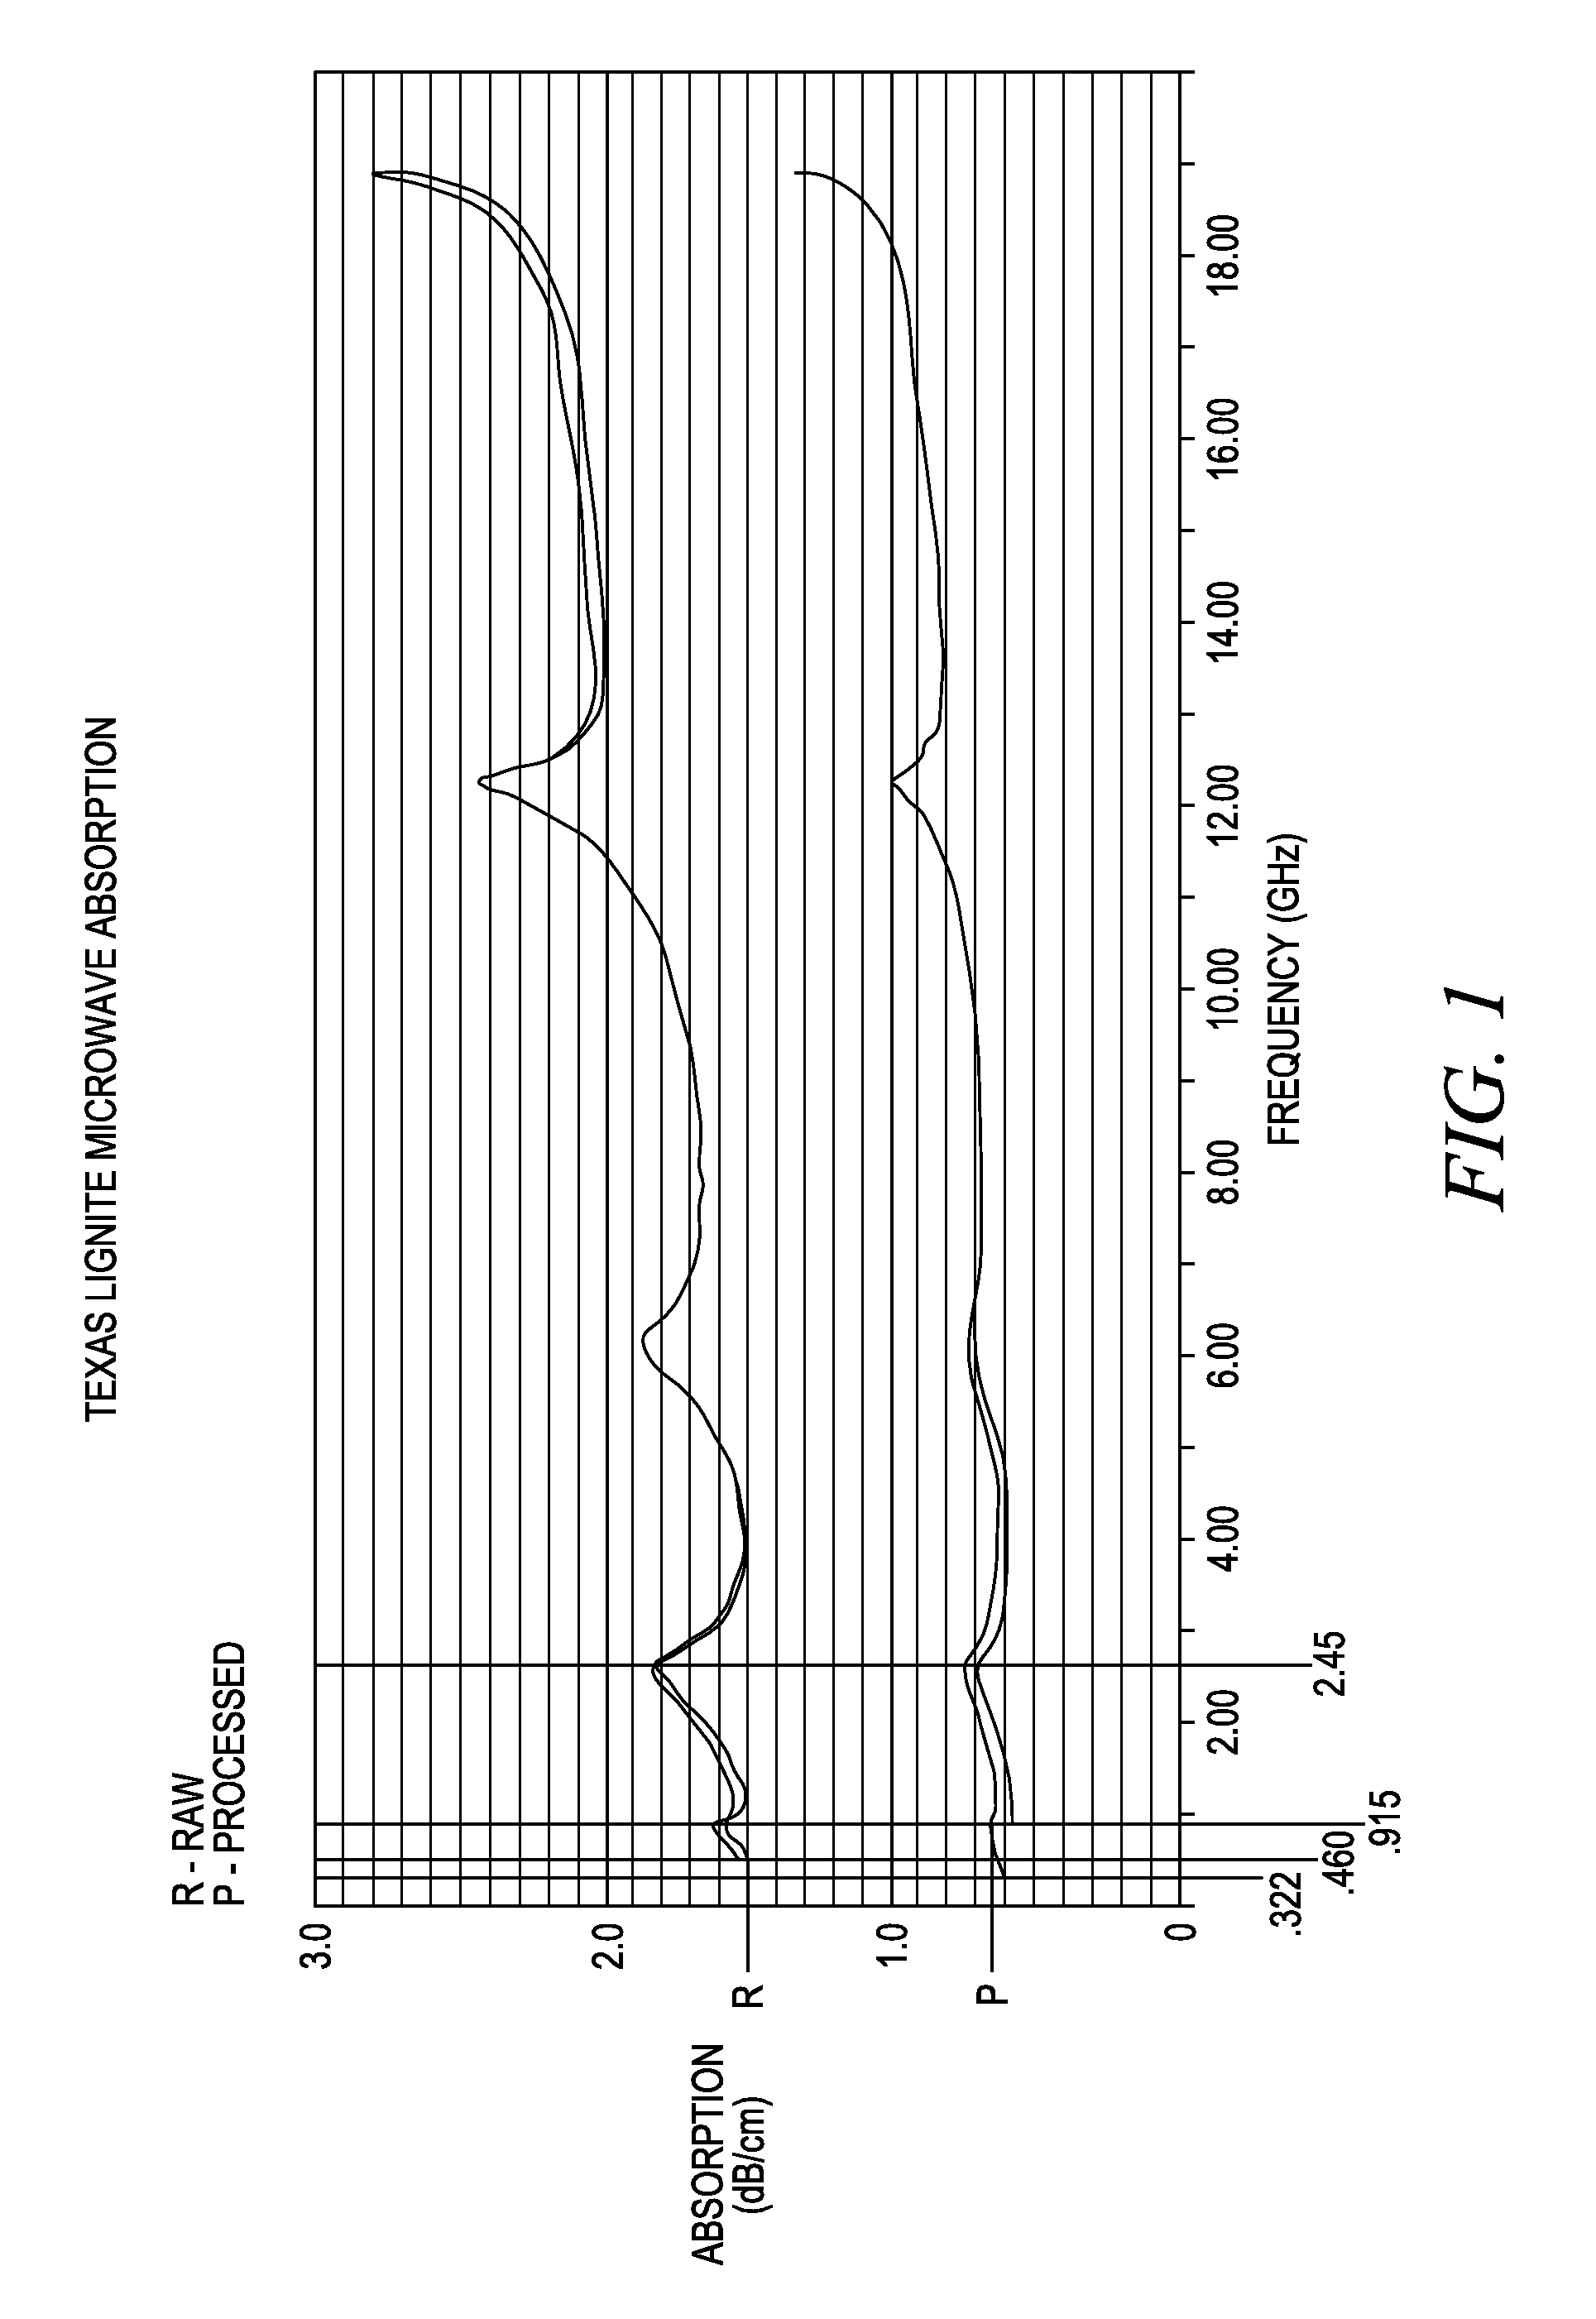 Pre-burning, dry process methodology and systems for enhancing metallurgical solid fuel properties